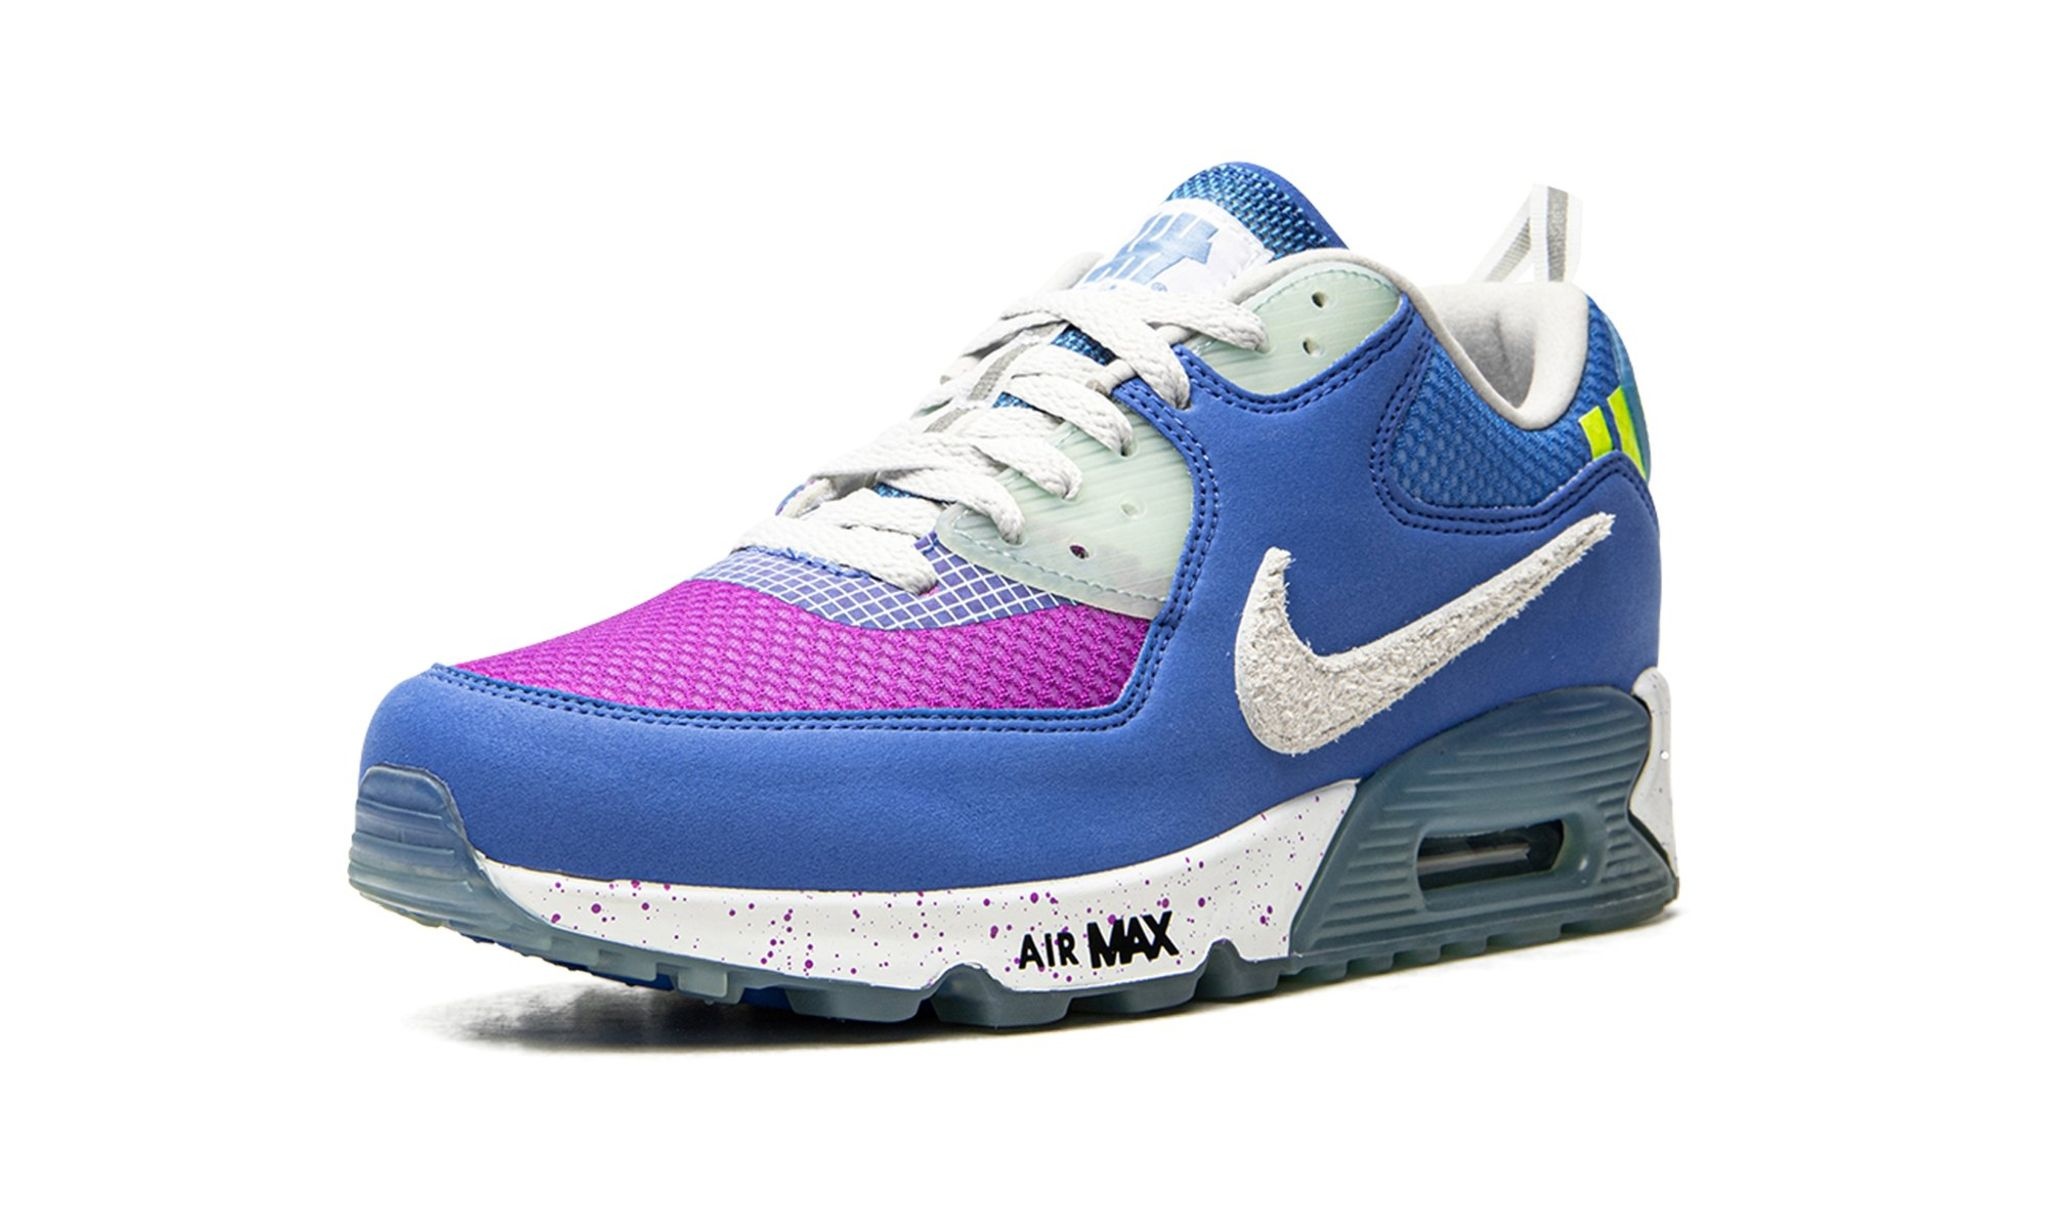 Air Max 90 "Undefeated - Pacific Blue" - 4